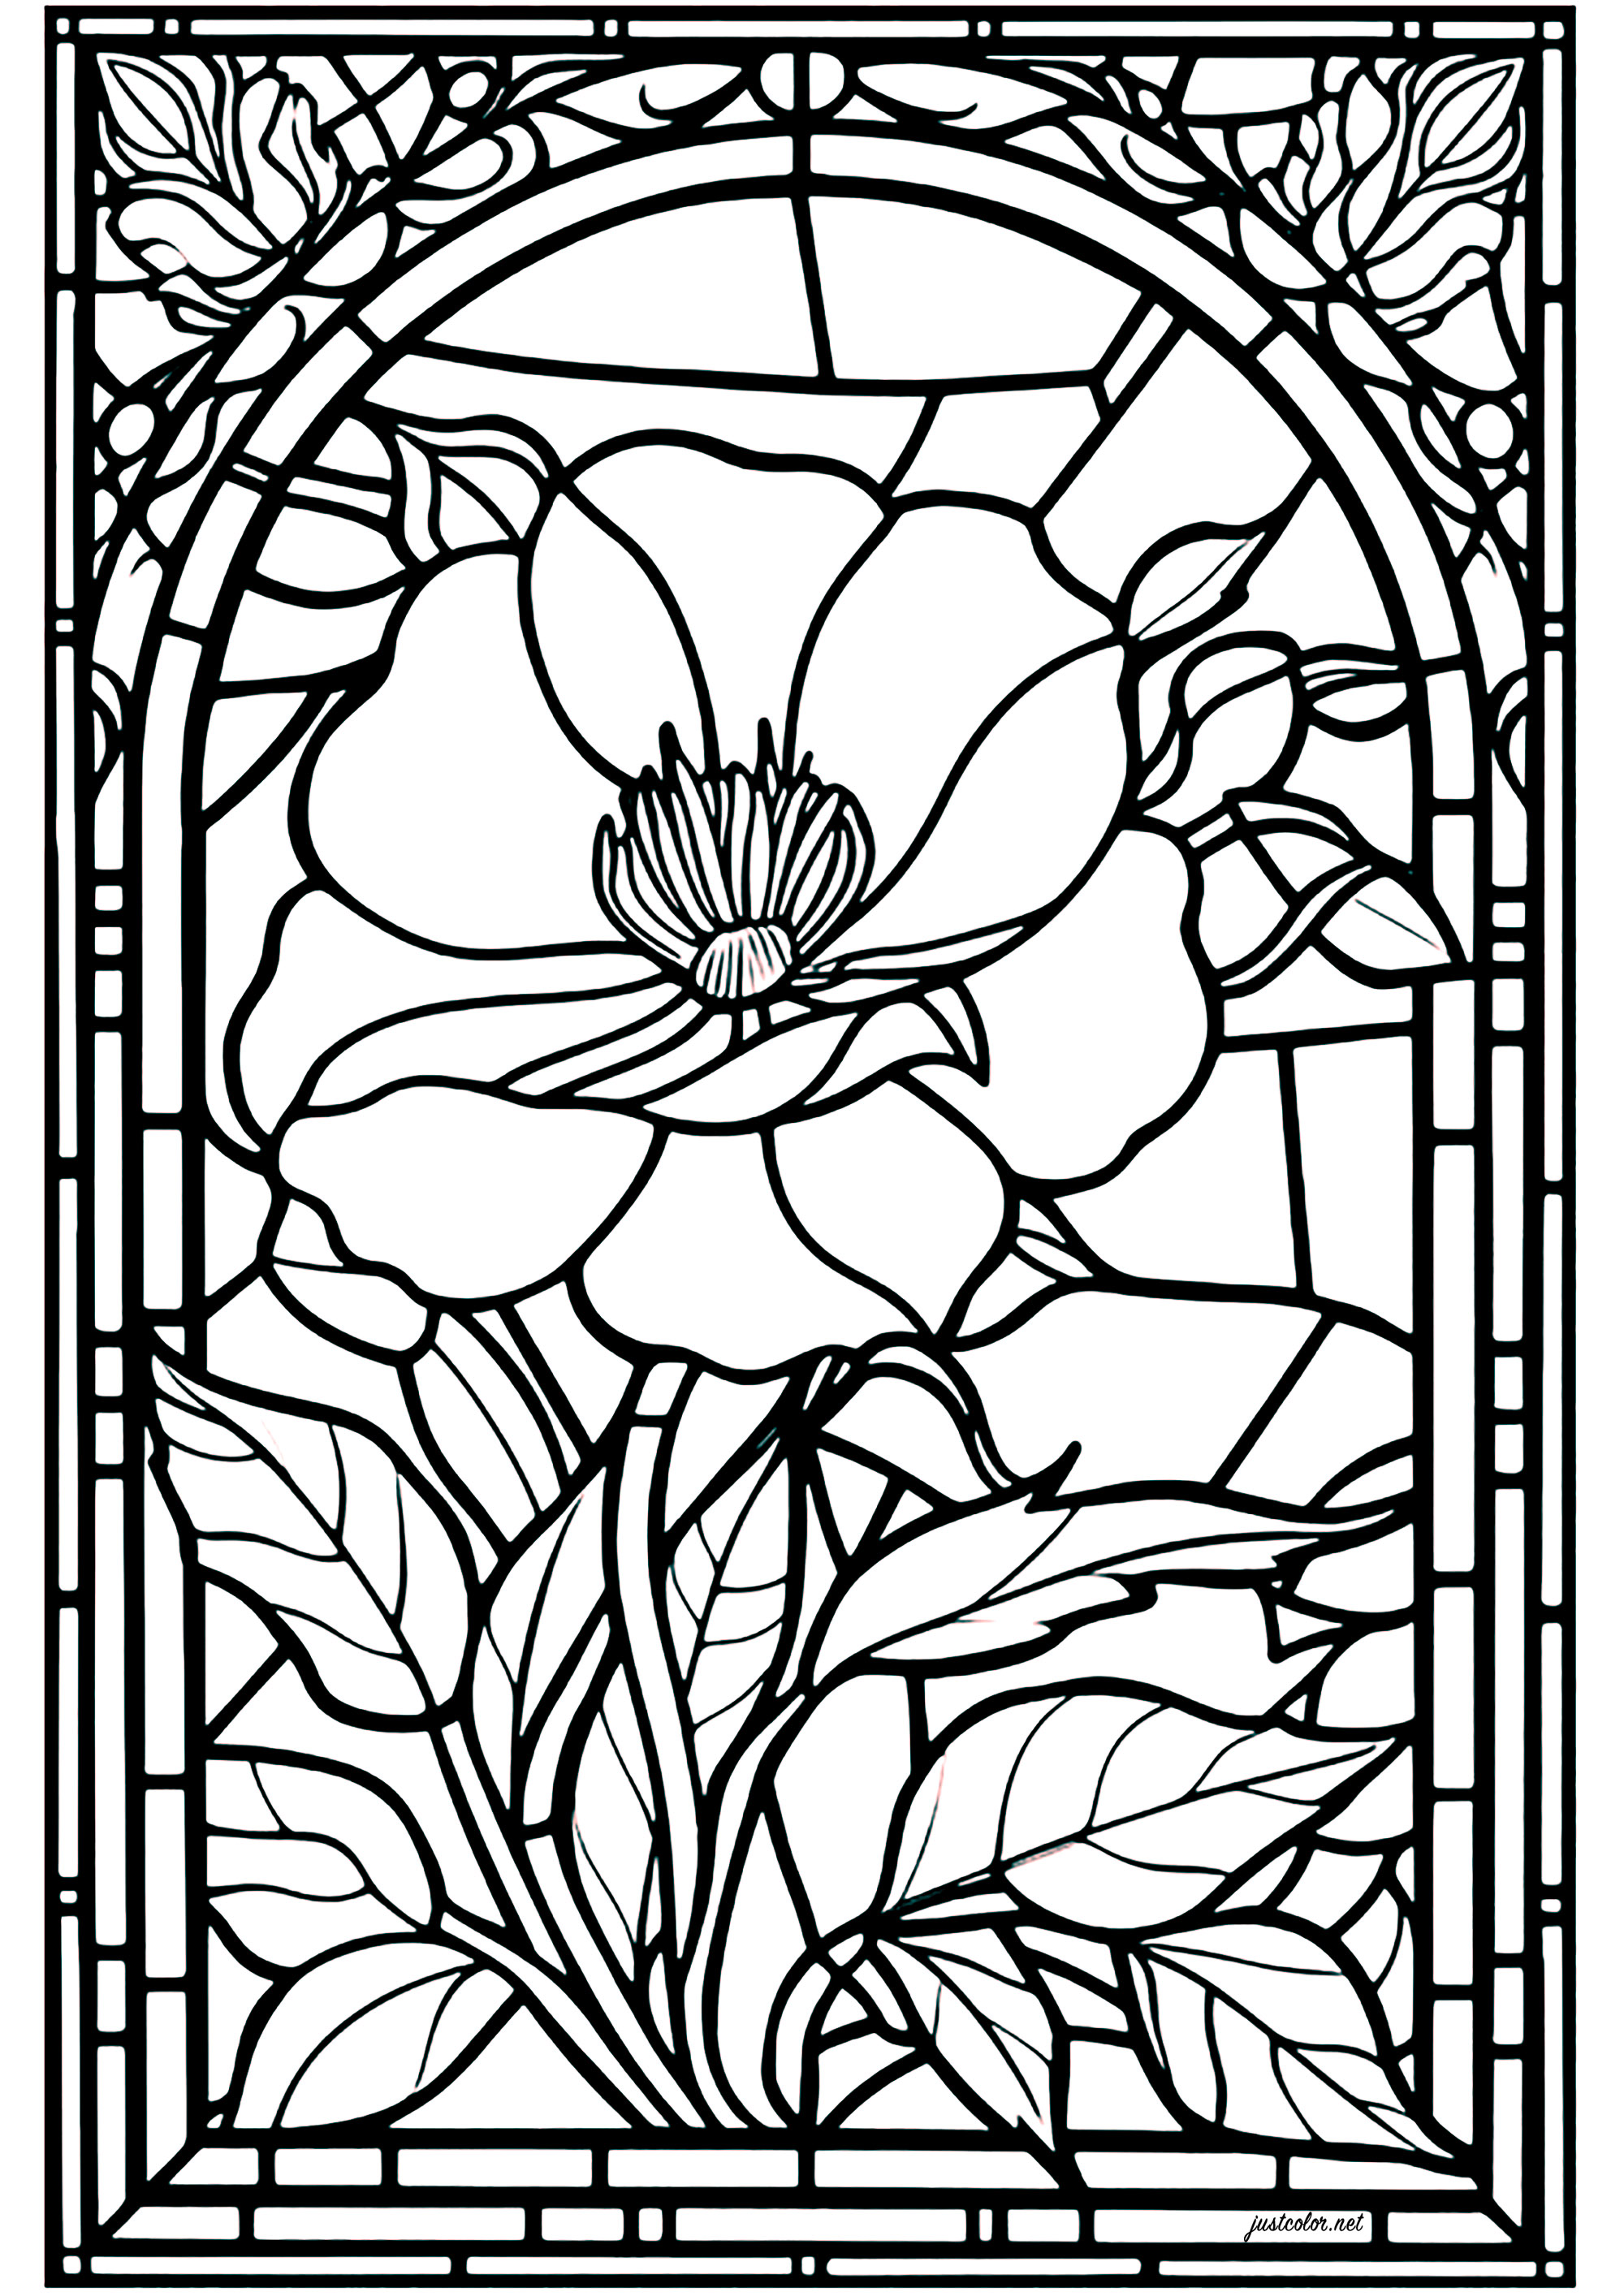 Stained Glass Flower 3 Stained Glass Adult Coloring Pages